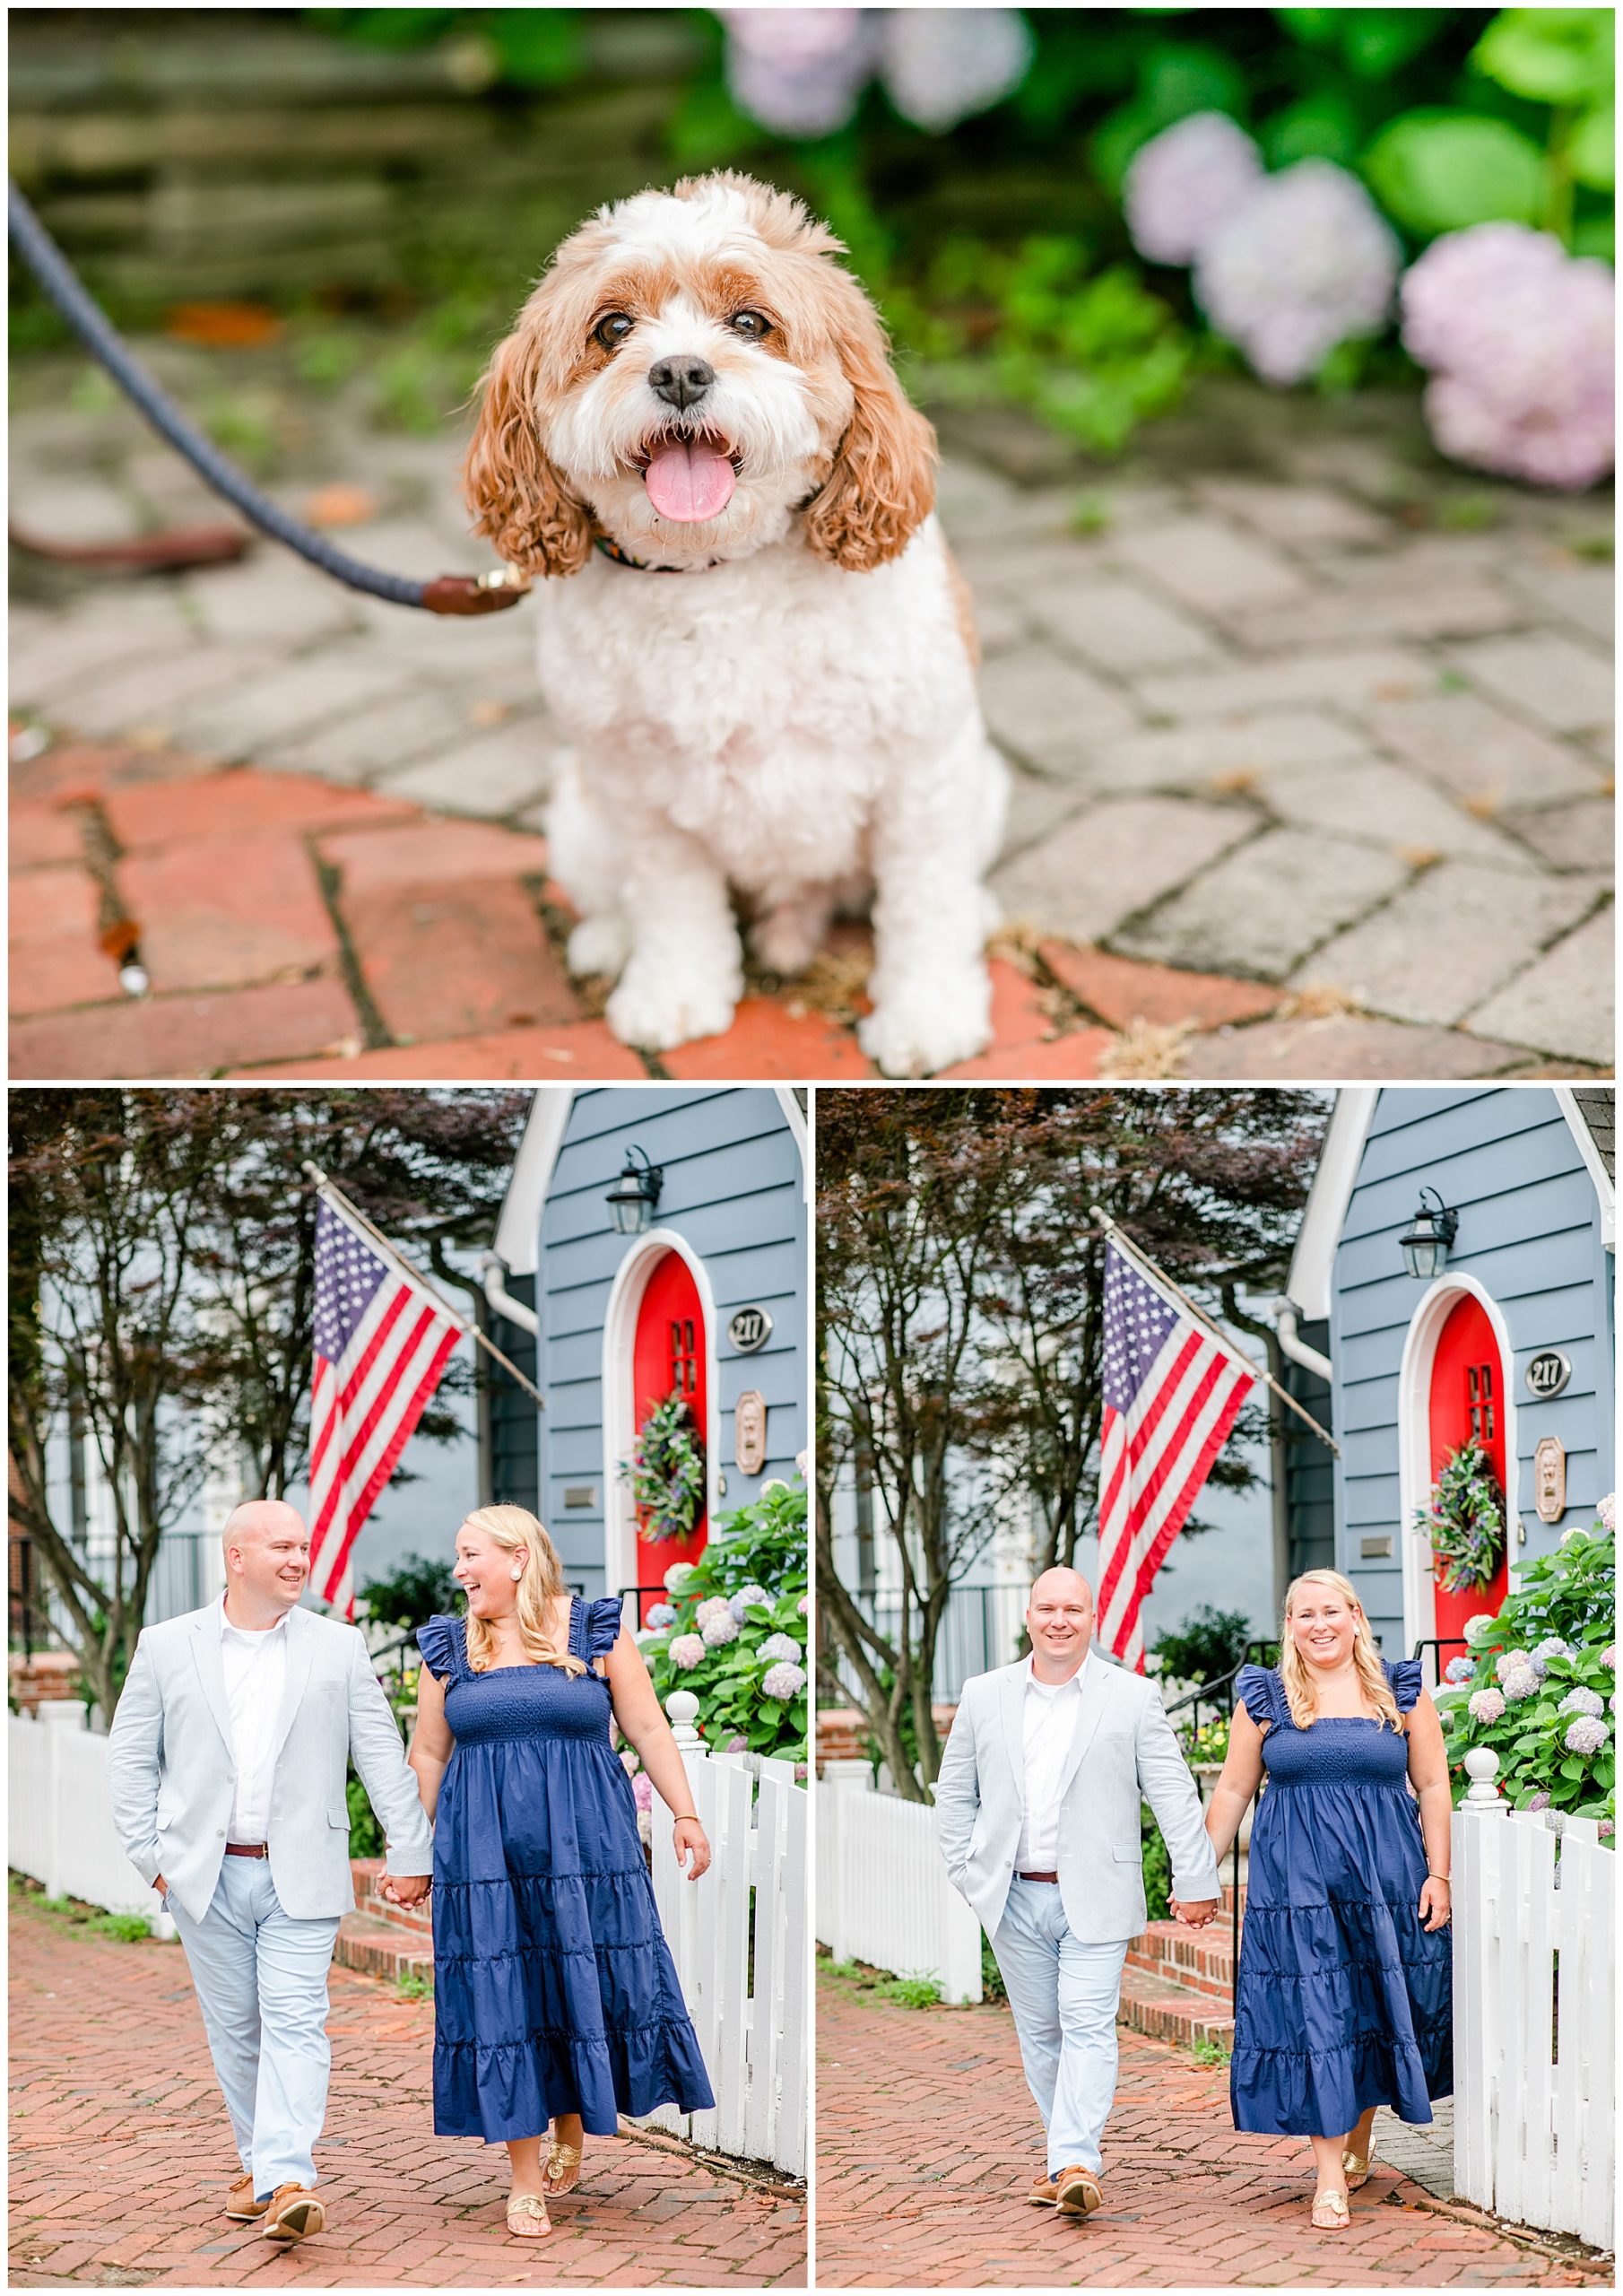 late spring Annapolis engagement photos, nautical engagement photos, Annapolis Maryland, Maryland engagement photos, MD wedding photographer, MD engagement photos, all American engagement photos, downtown Annapolis engagement photos, Annapolis photographer, Rachel E.H. Photography, summer engagement photos, red white and blue aesthetic, small dog